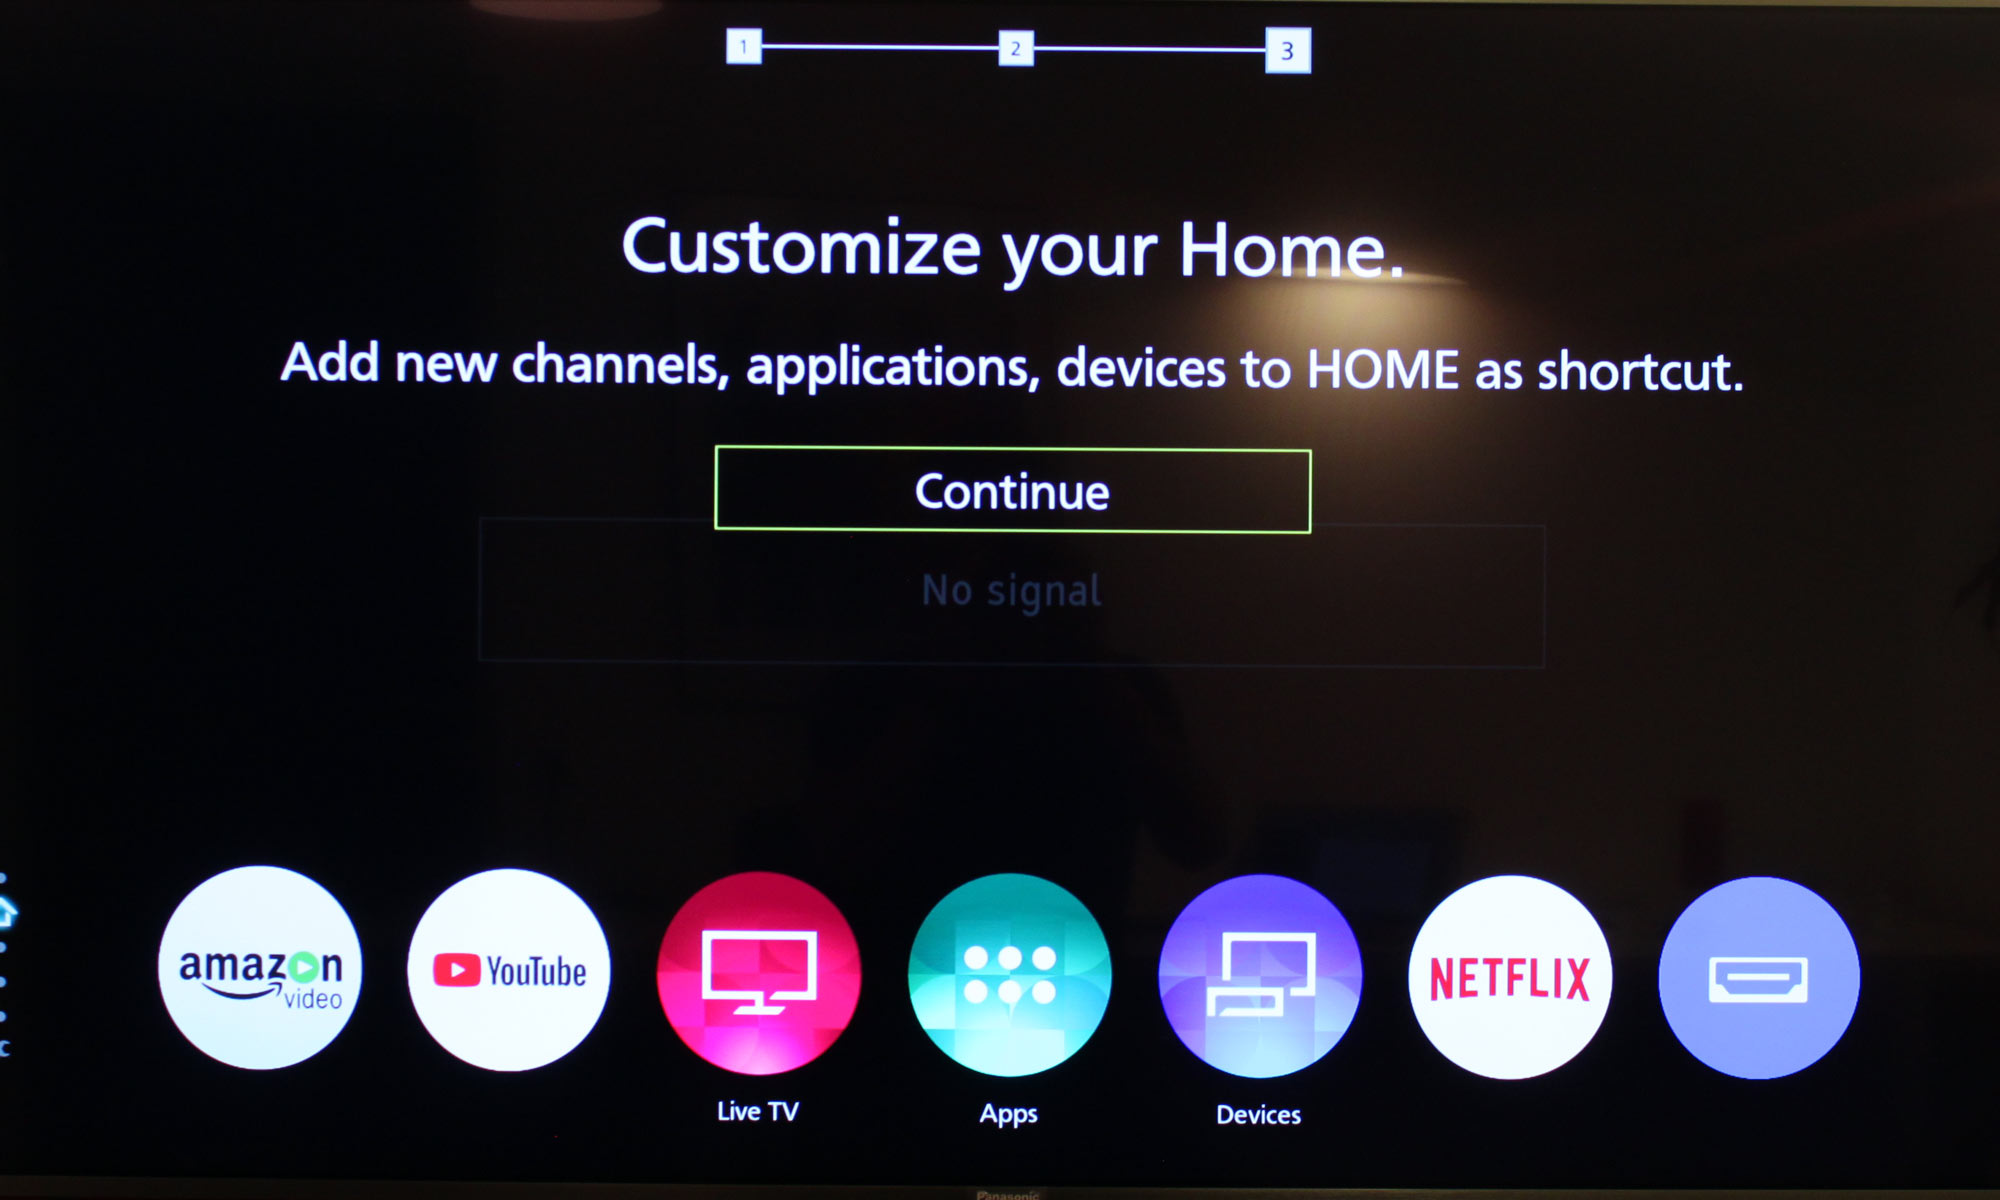 How to Add Apps to Panasonic Smart TV